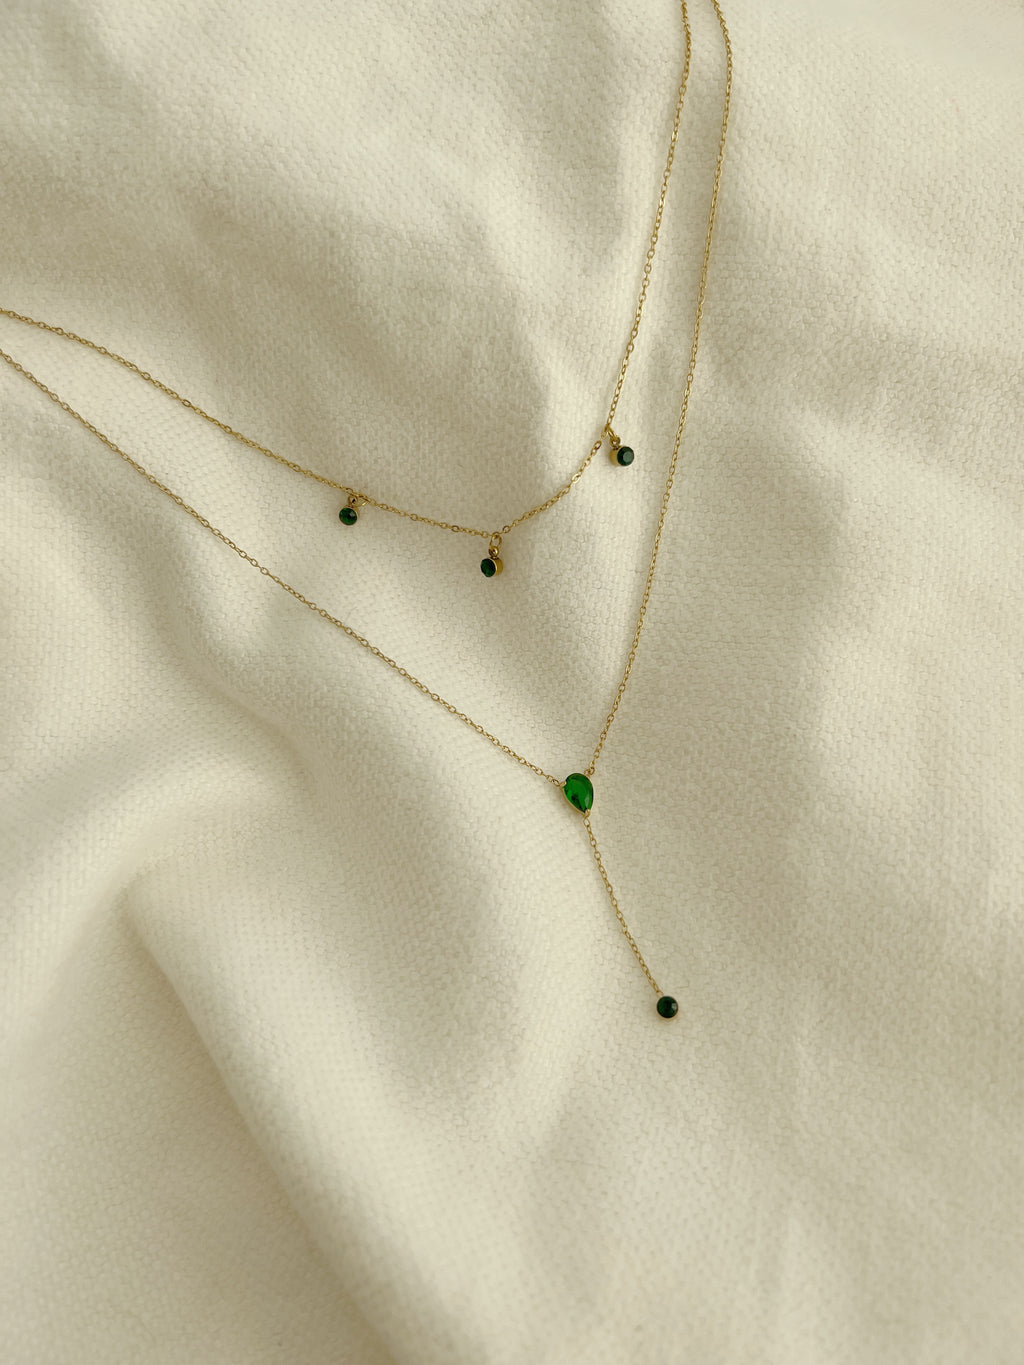 Sula necklace - Golden and green